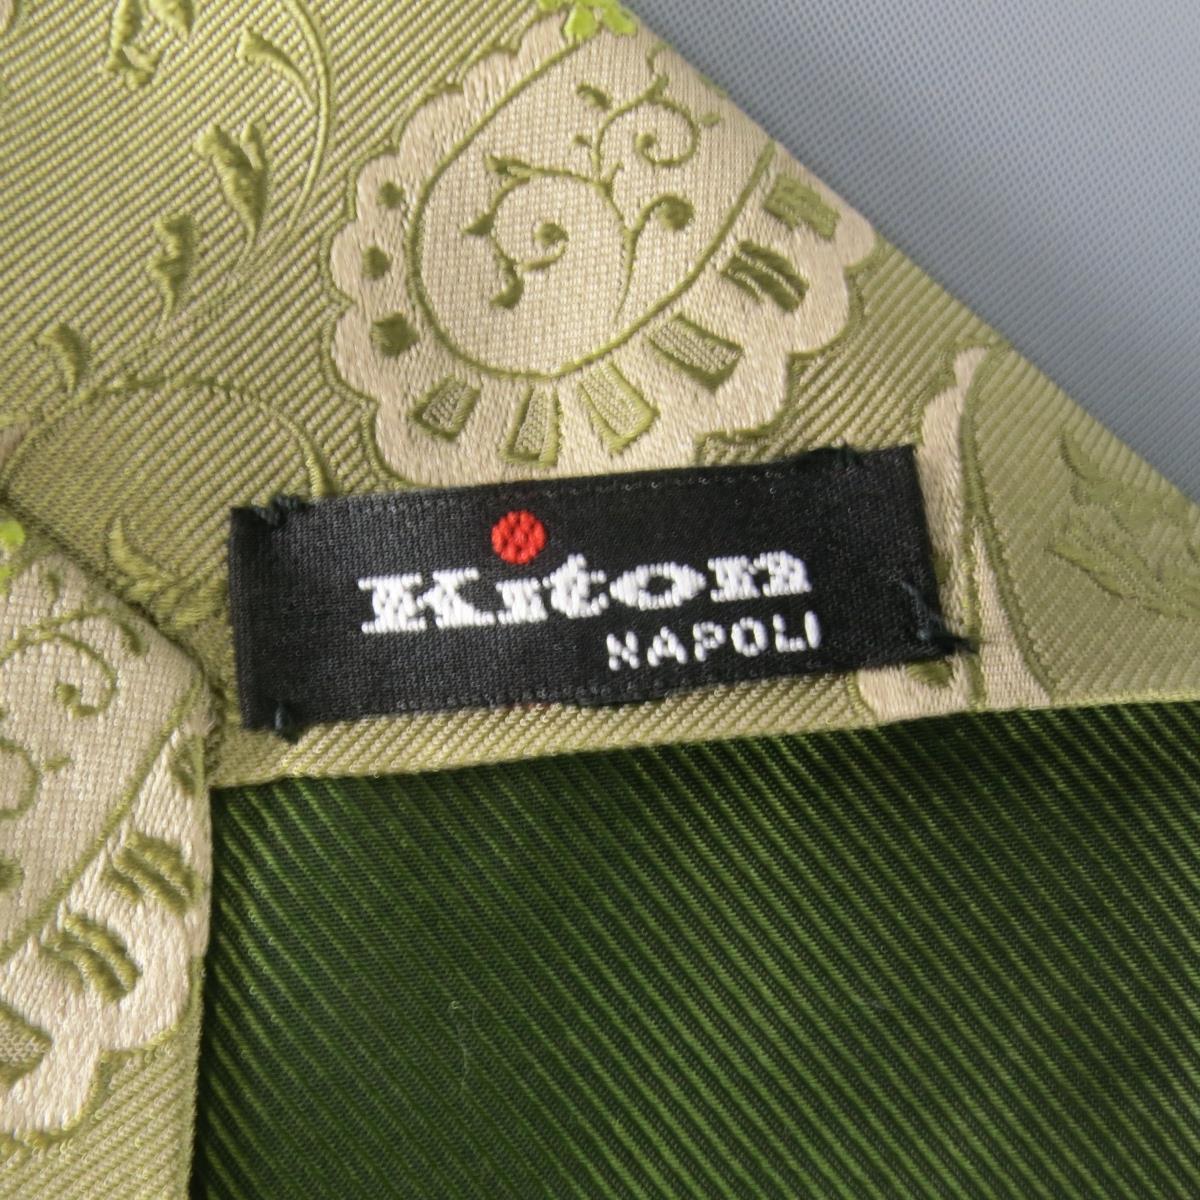 Classic KITON tie in olive
  beige faille with large scale paisley textured print. Made in Italy.Good Pre-Owned Condition.Width: 3.75 inches 
  
  
  
 Sui Generis Reference: 78167
 Category: Tie
 More Details
  
 Brand: KITON
 Color: Beige
